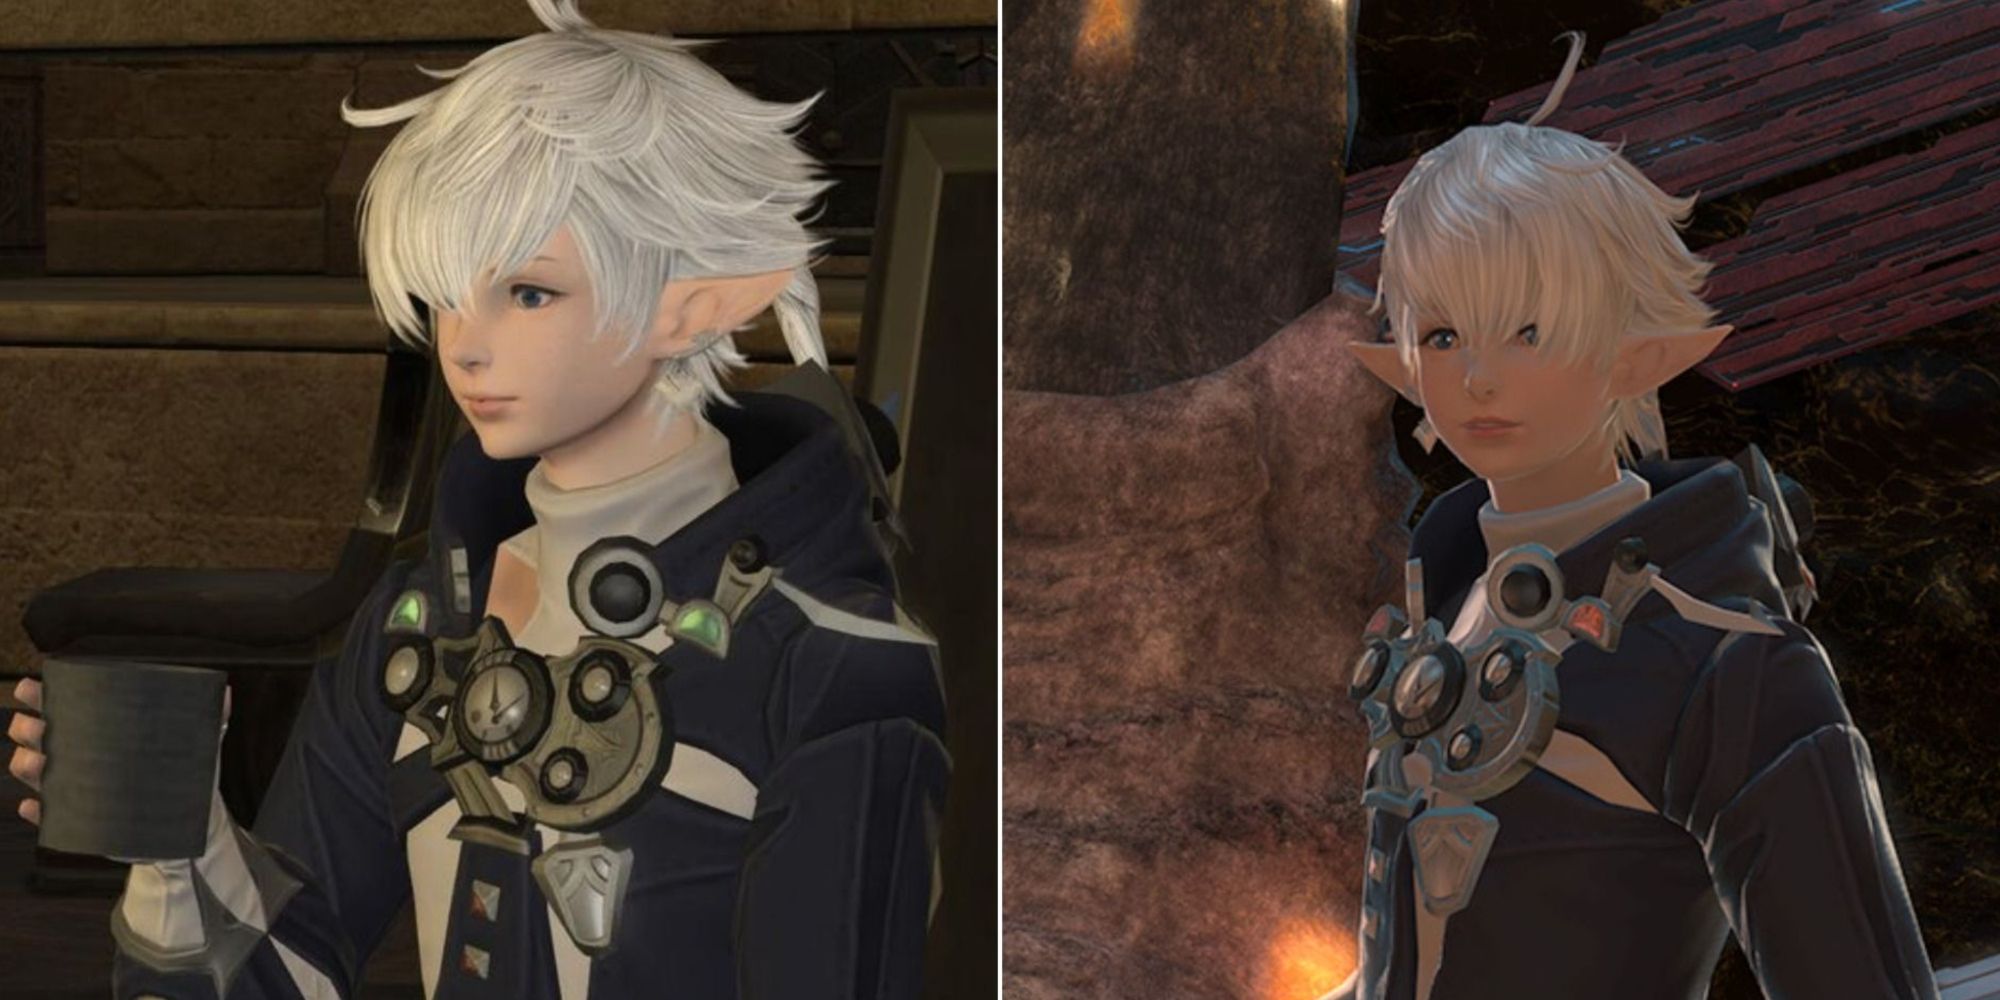 A split image of the twin duo Alphinaud and Alisaie from FF14, one with a mug in hand.